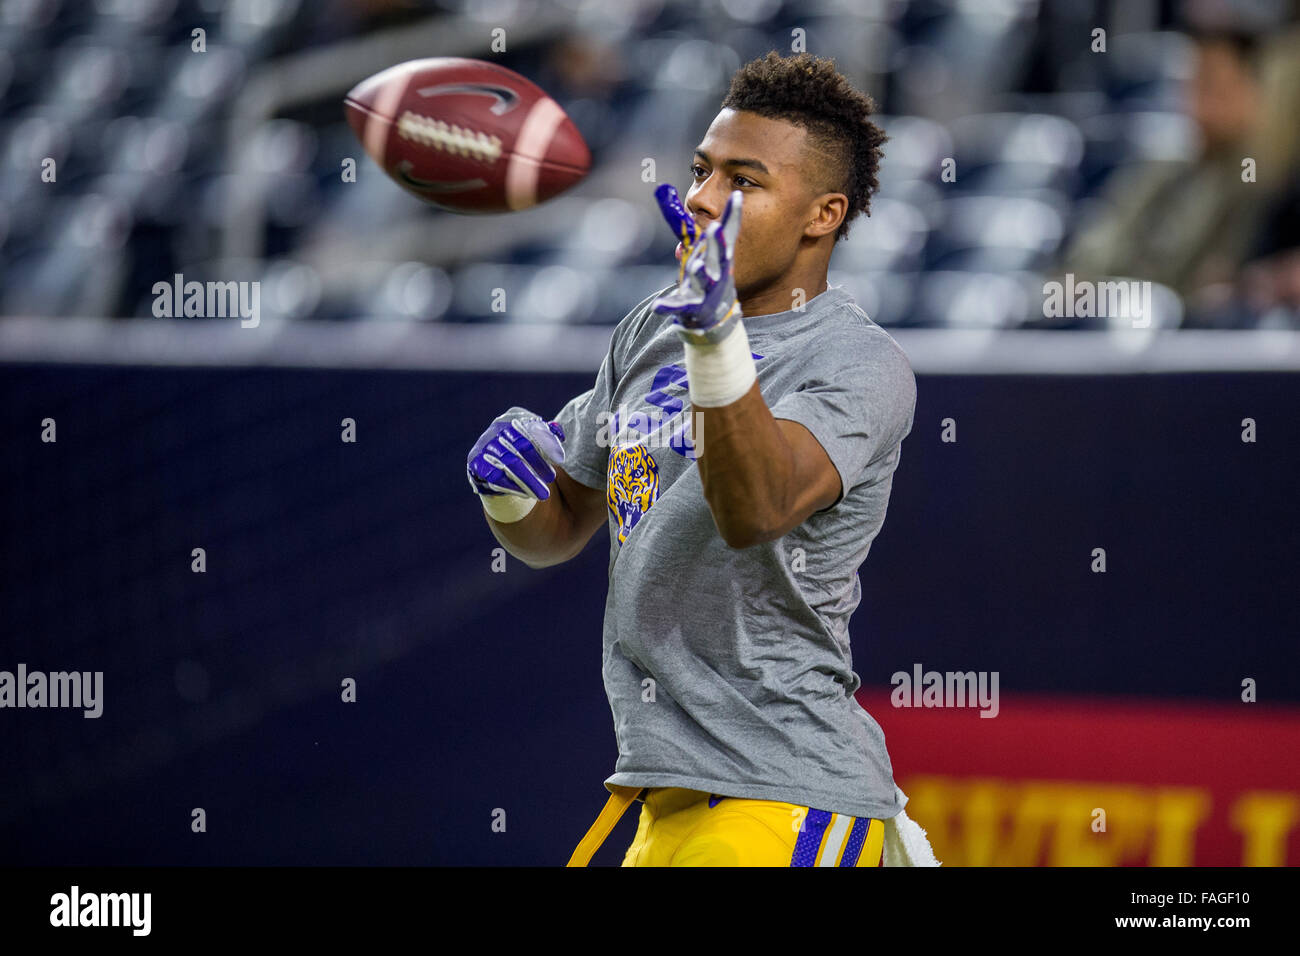 Houston, Texas, USA. 29th Dec, 2015. LSU Tigers wide receiver Malachi Dupre (15) warms up prior to the Advocare Texas Bowl NCAA football game between the LSU Tigers and the Texas Tech Red Raiders at NRG Stadium in Houston, TX on December 29th, 2015. Credit:  Trask Smith/ZUMA Wire/Alamy Live News Stock Photo